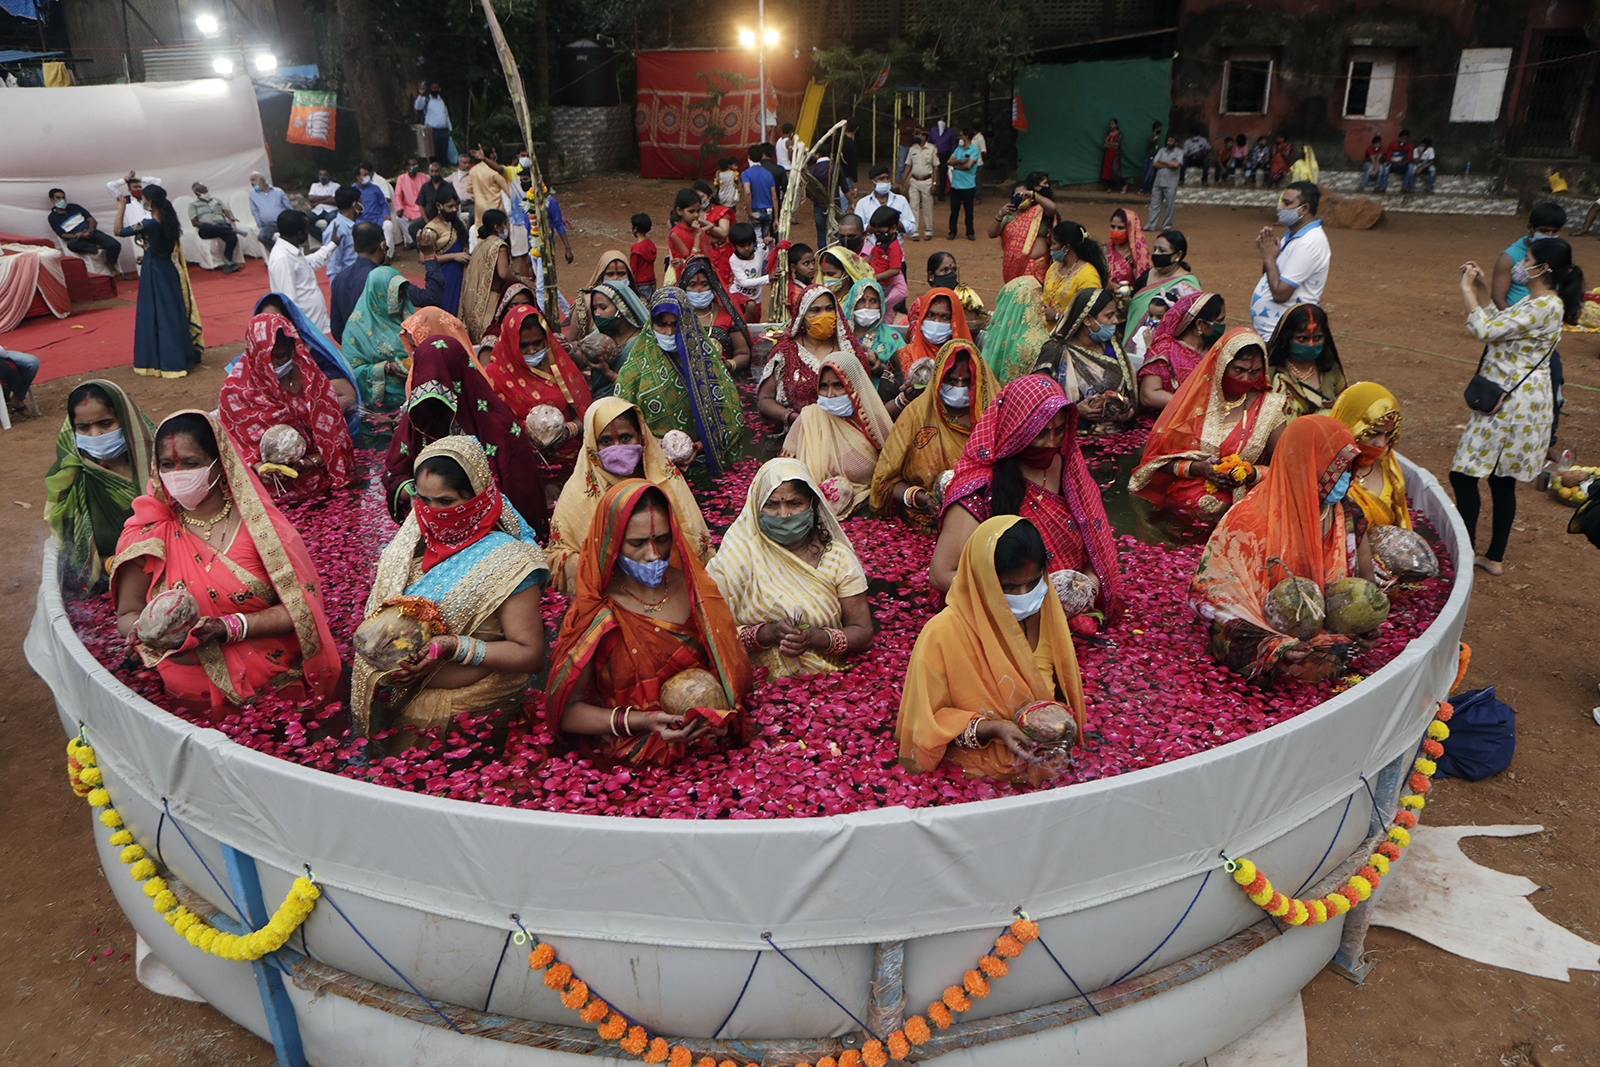 Indian women perform rituals standing inside an artificial pond for the Chhat Puja festival in Mumbai, India, Friday, Nov. 20, 2020. Health officials have warned about the potential for the coronavirus to spread during the upcoming religious festival season, which is marked by huge gatherings in temples and shopping districts. (AP Photo/Rajanish Kakade)